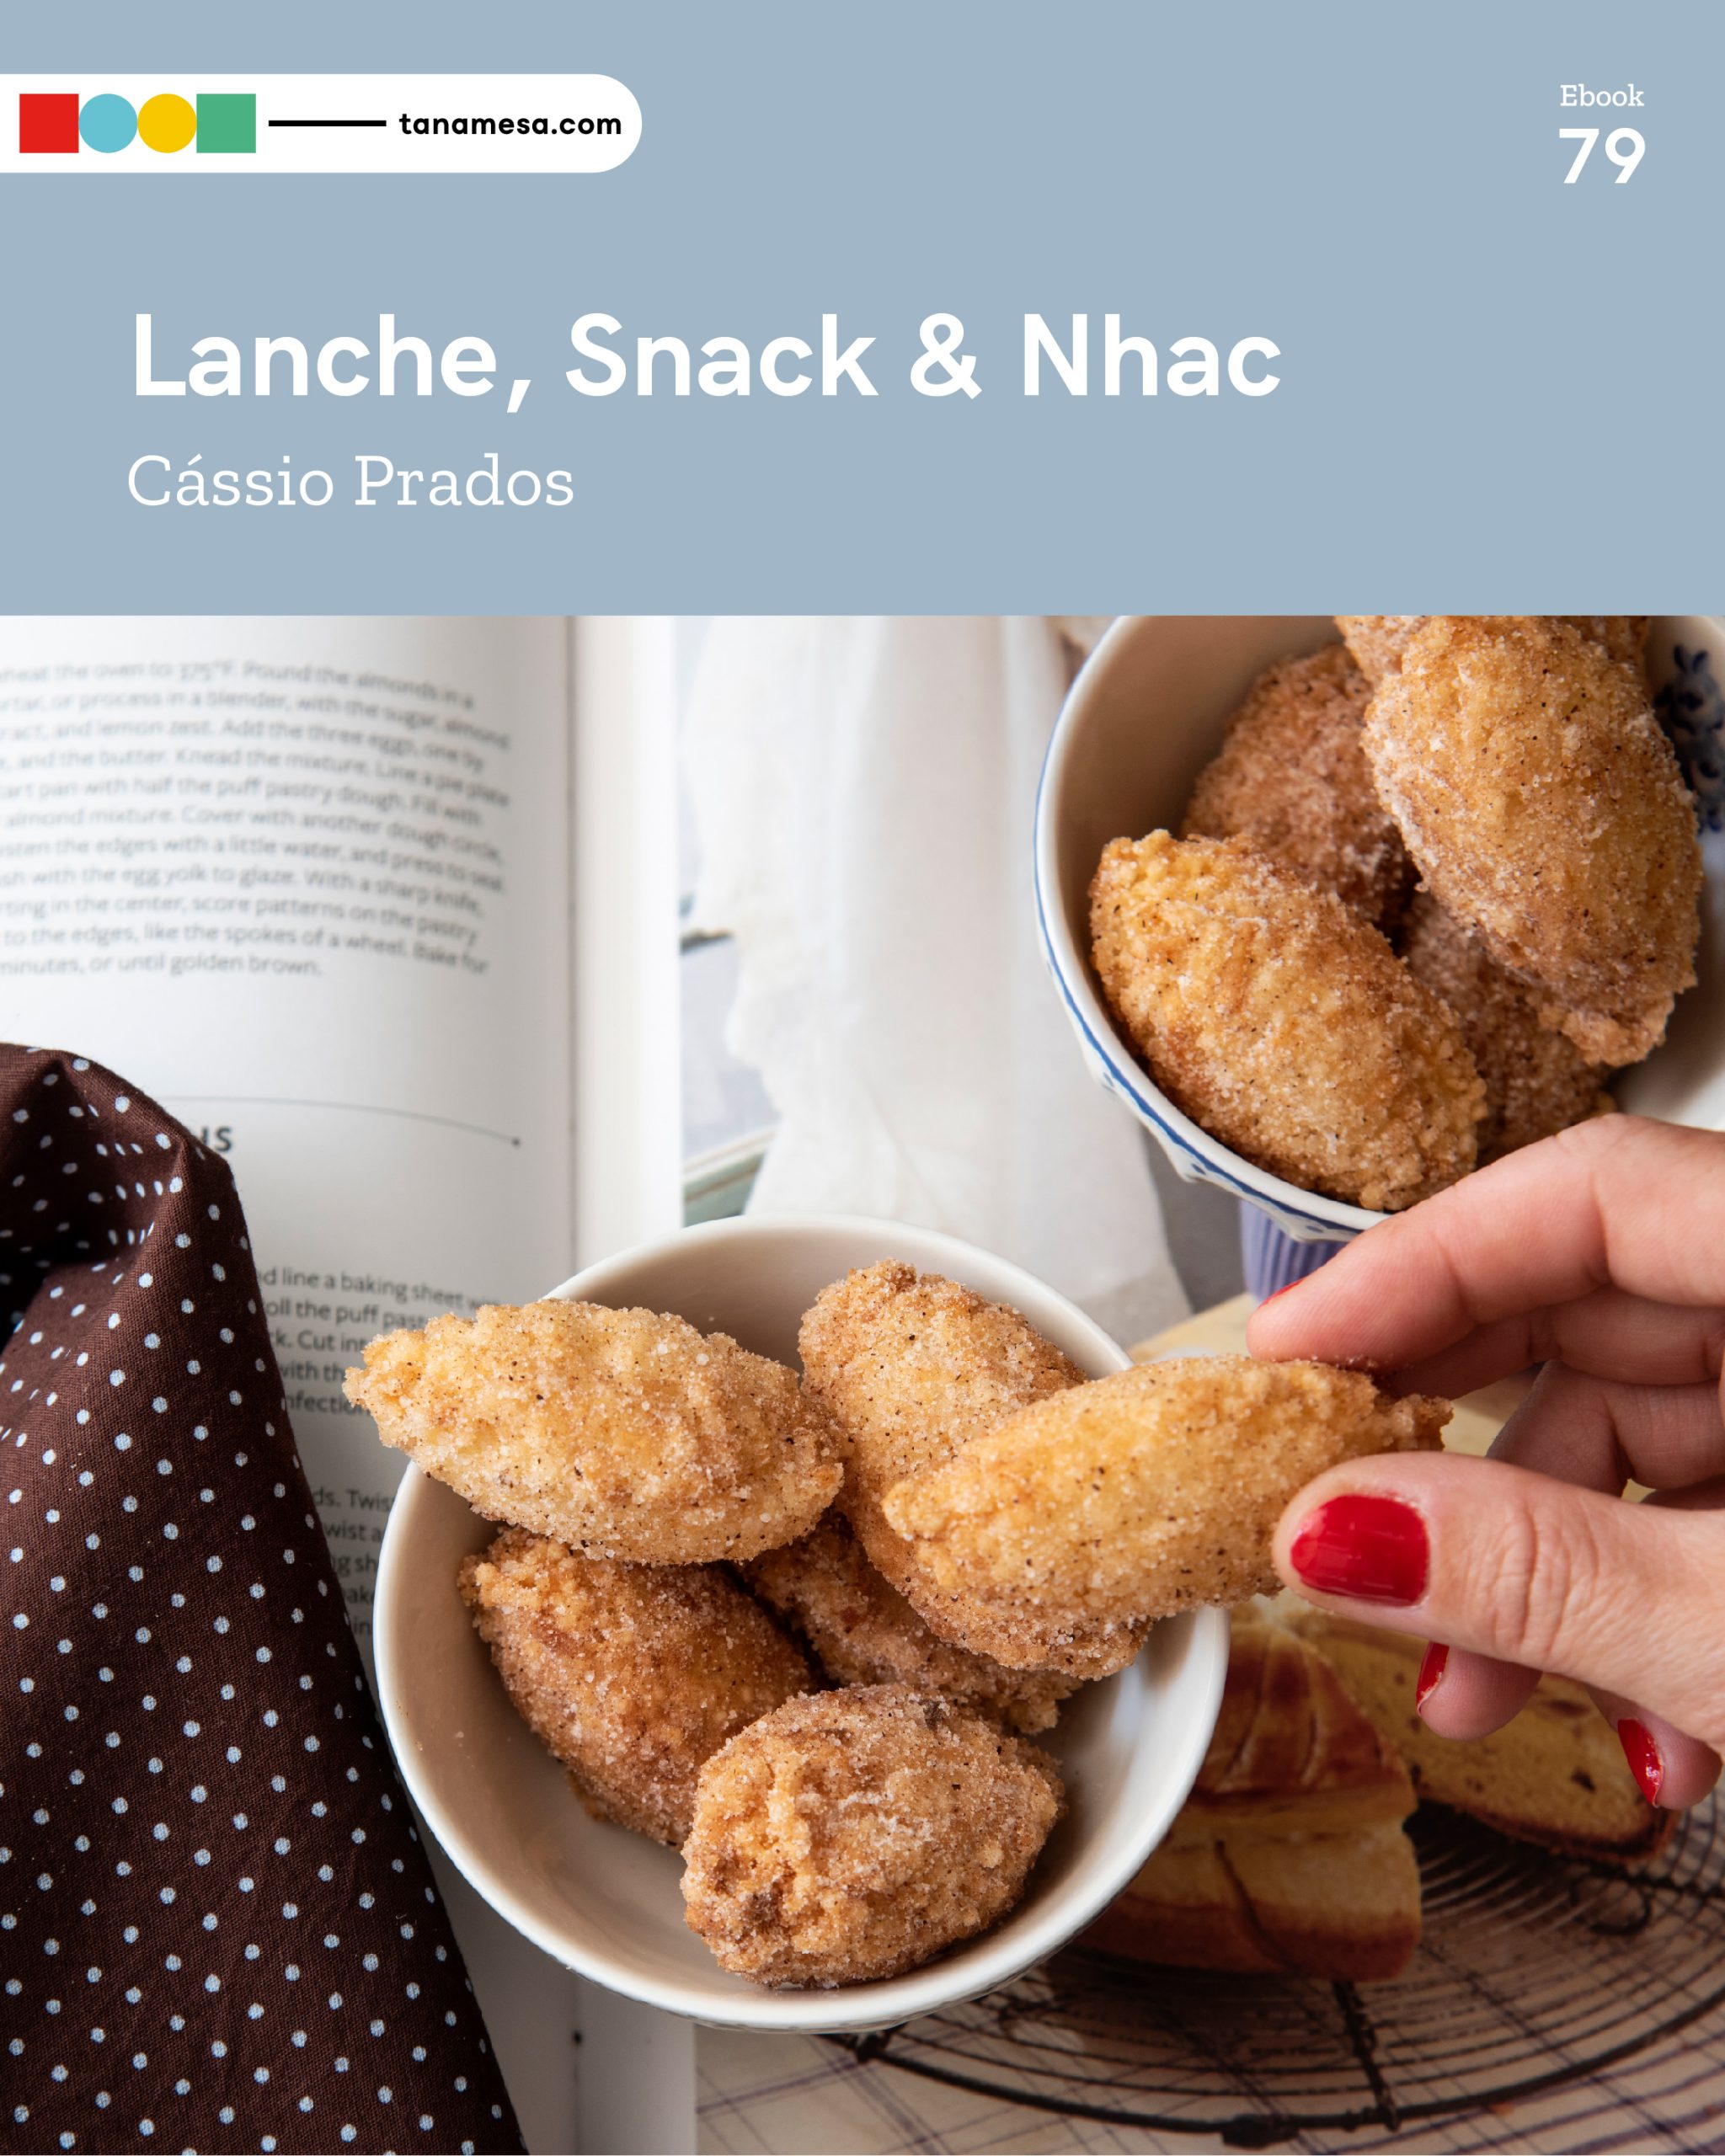 Lanche, Snack & Nhac